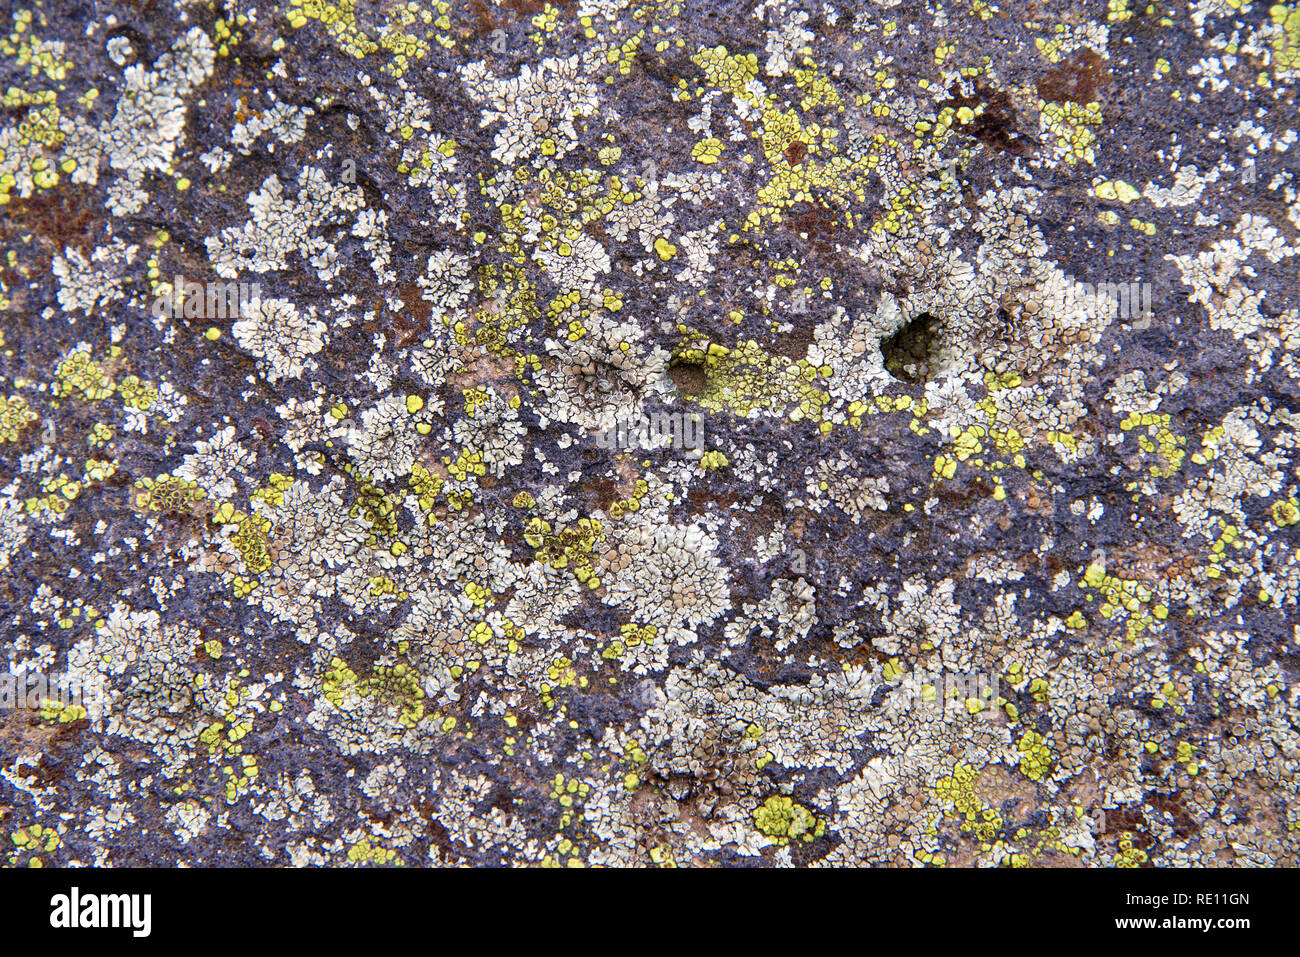 Close up on concrete structure covered in white, yellow and green lichen.  Lichens come in many colors, sizes, and forms and can grow on almost any su Stock Photo